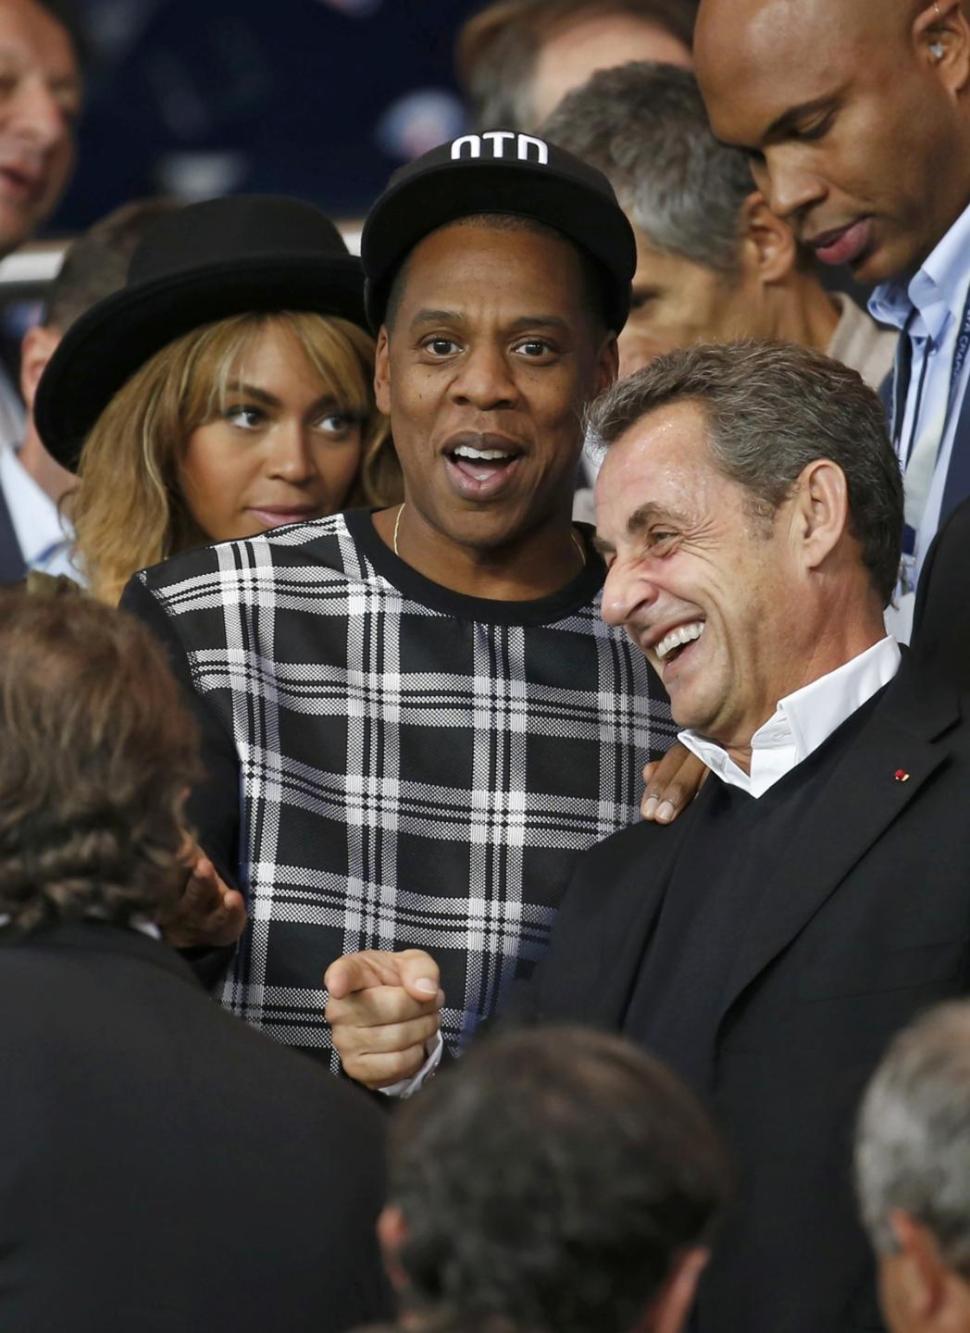 From left, Beyoncé, Jay Z and Nicolas Sarkozy team up for the Champions League soccer match.